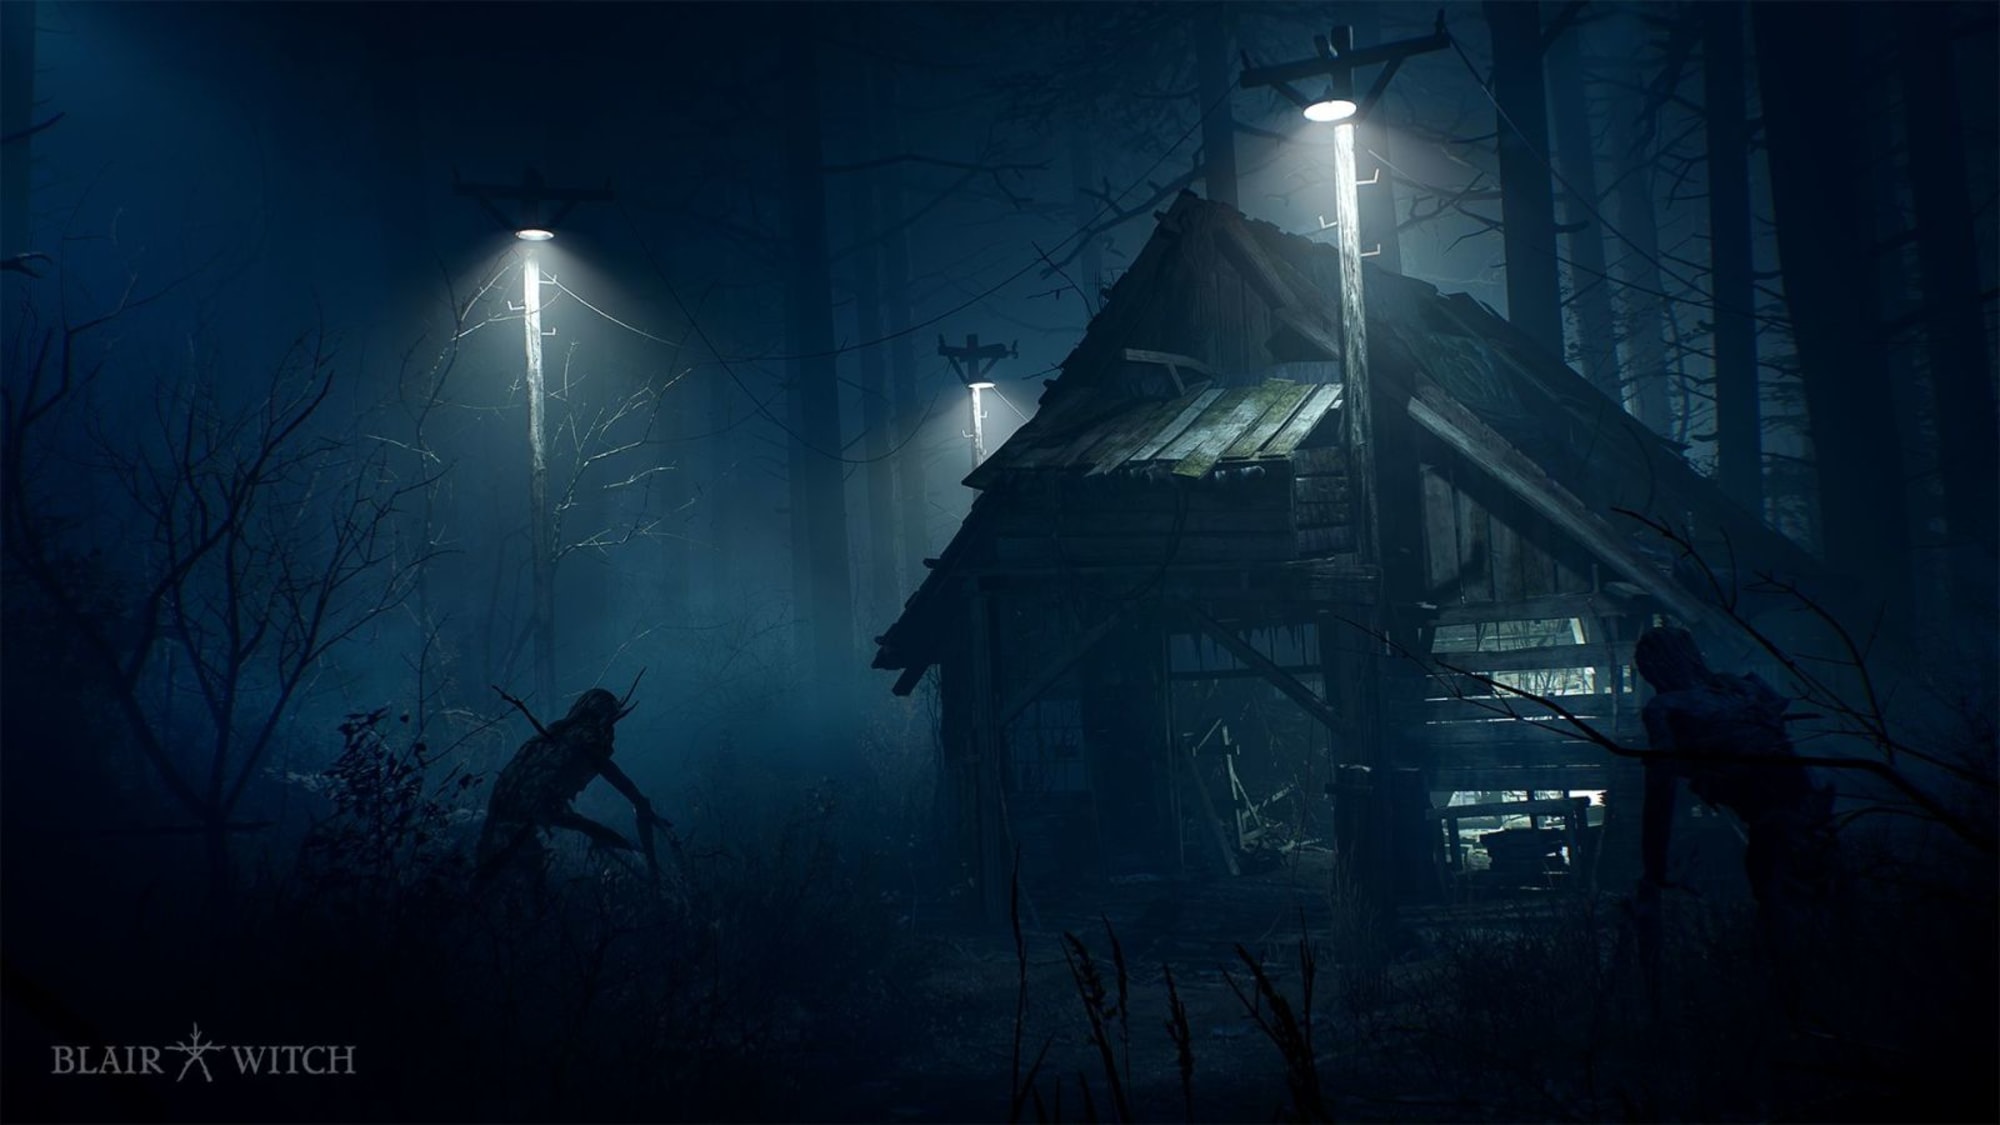 Blair Witch: 3 ways new game looks awesome shown in the